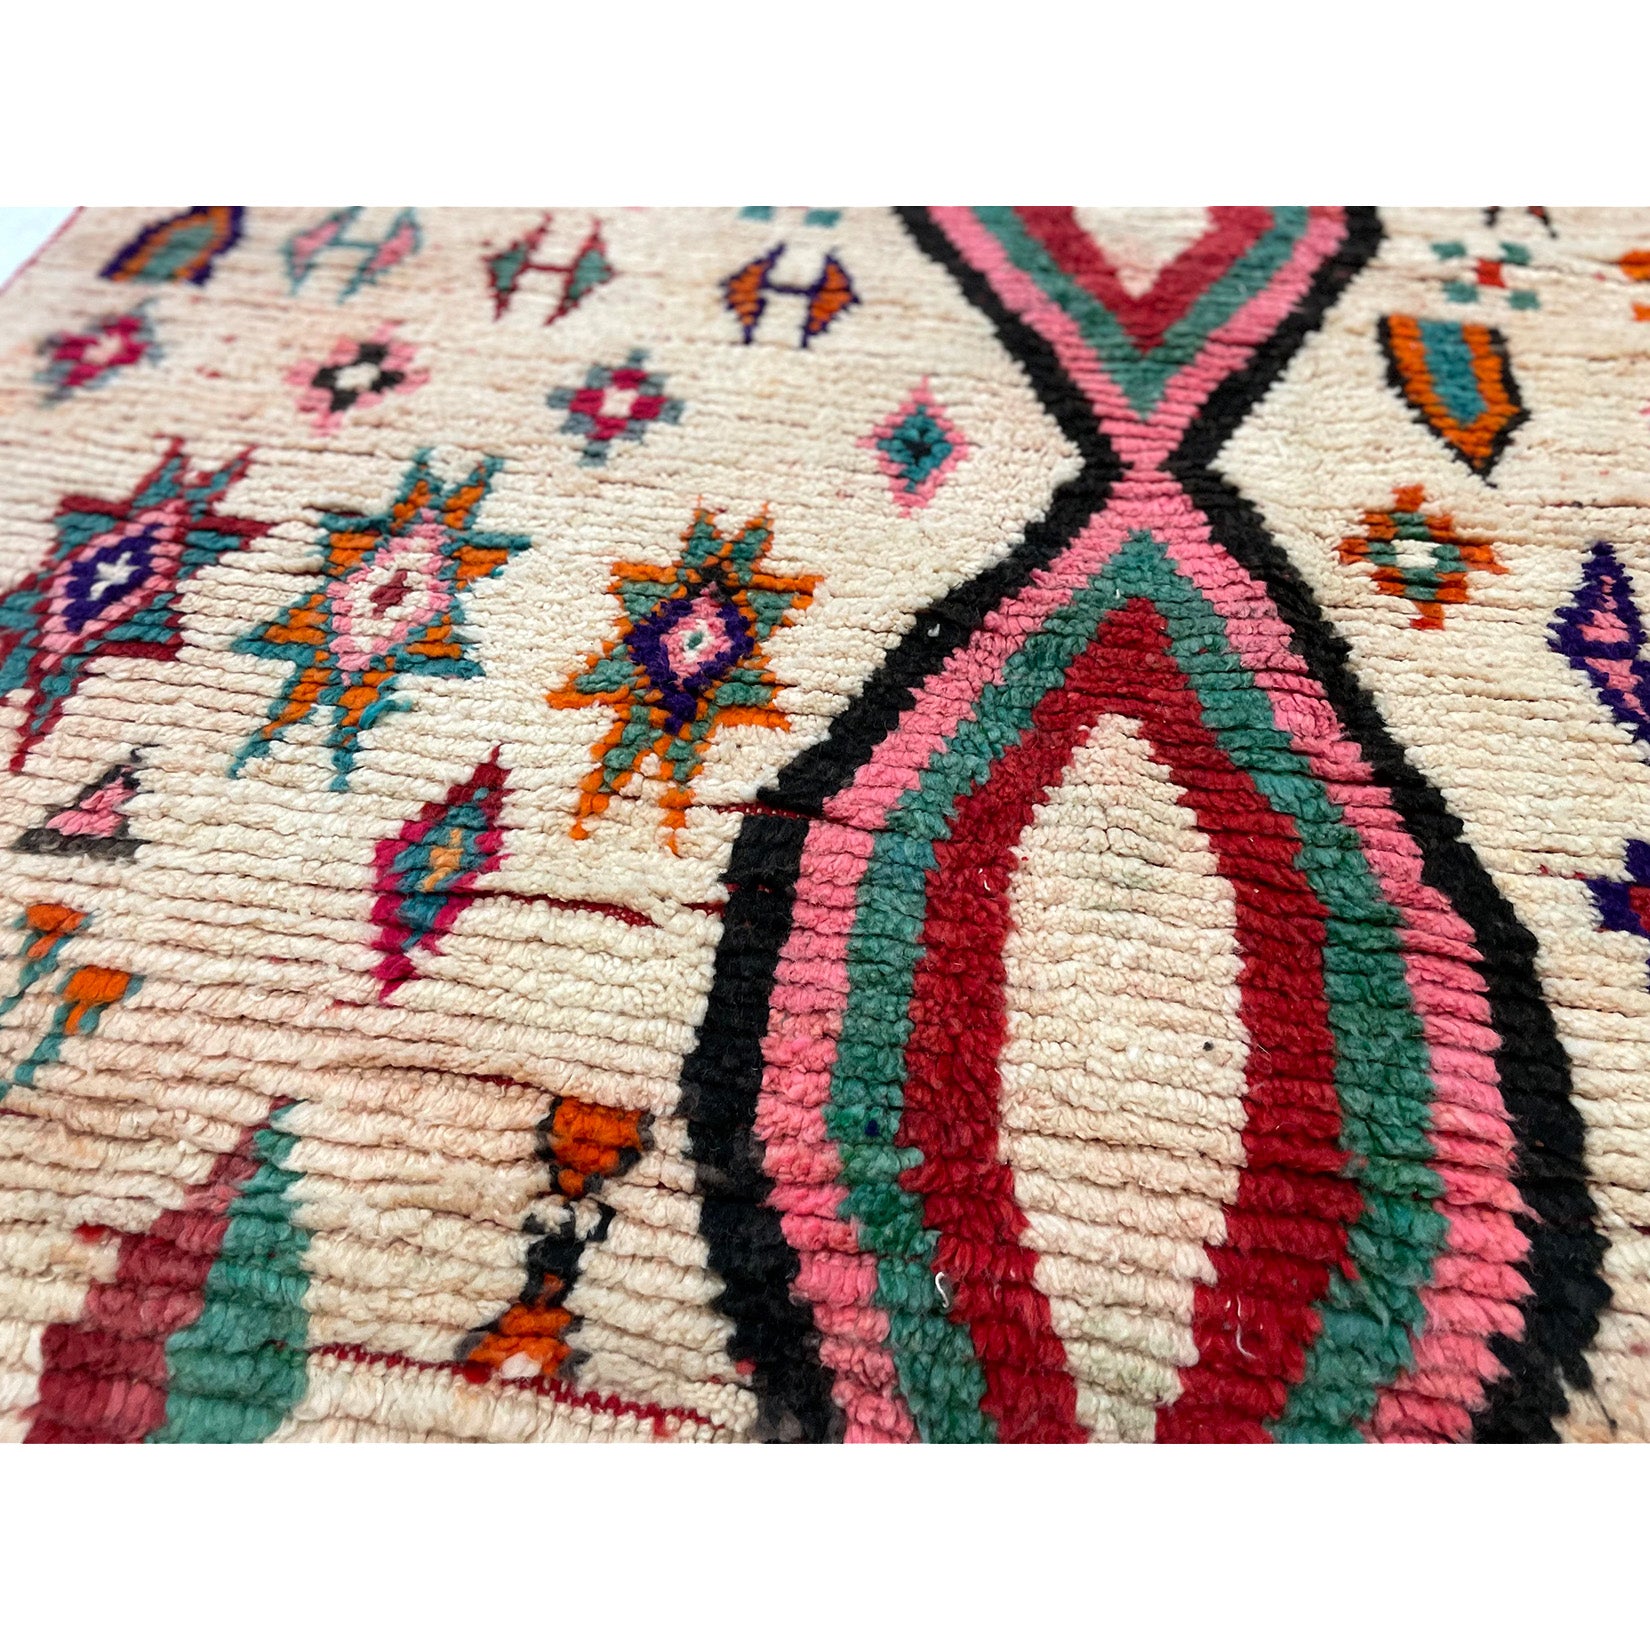 White Moroccan diamond rug with details in pink, blue, orange, green, and black - Kantara | Moroccan Rugs